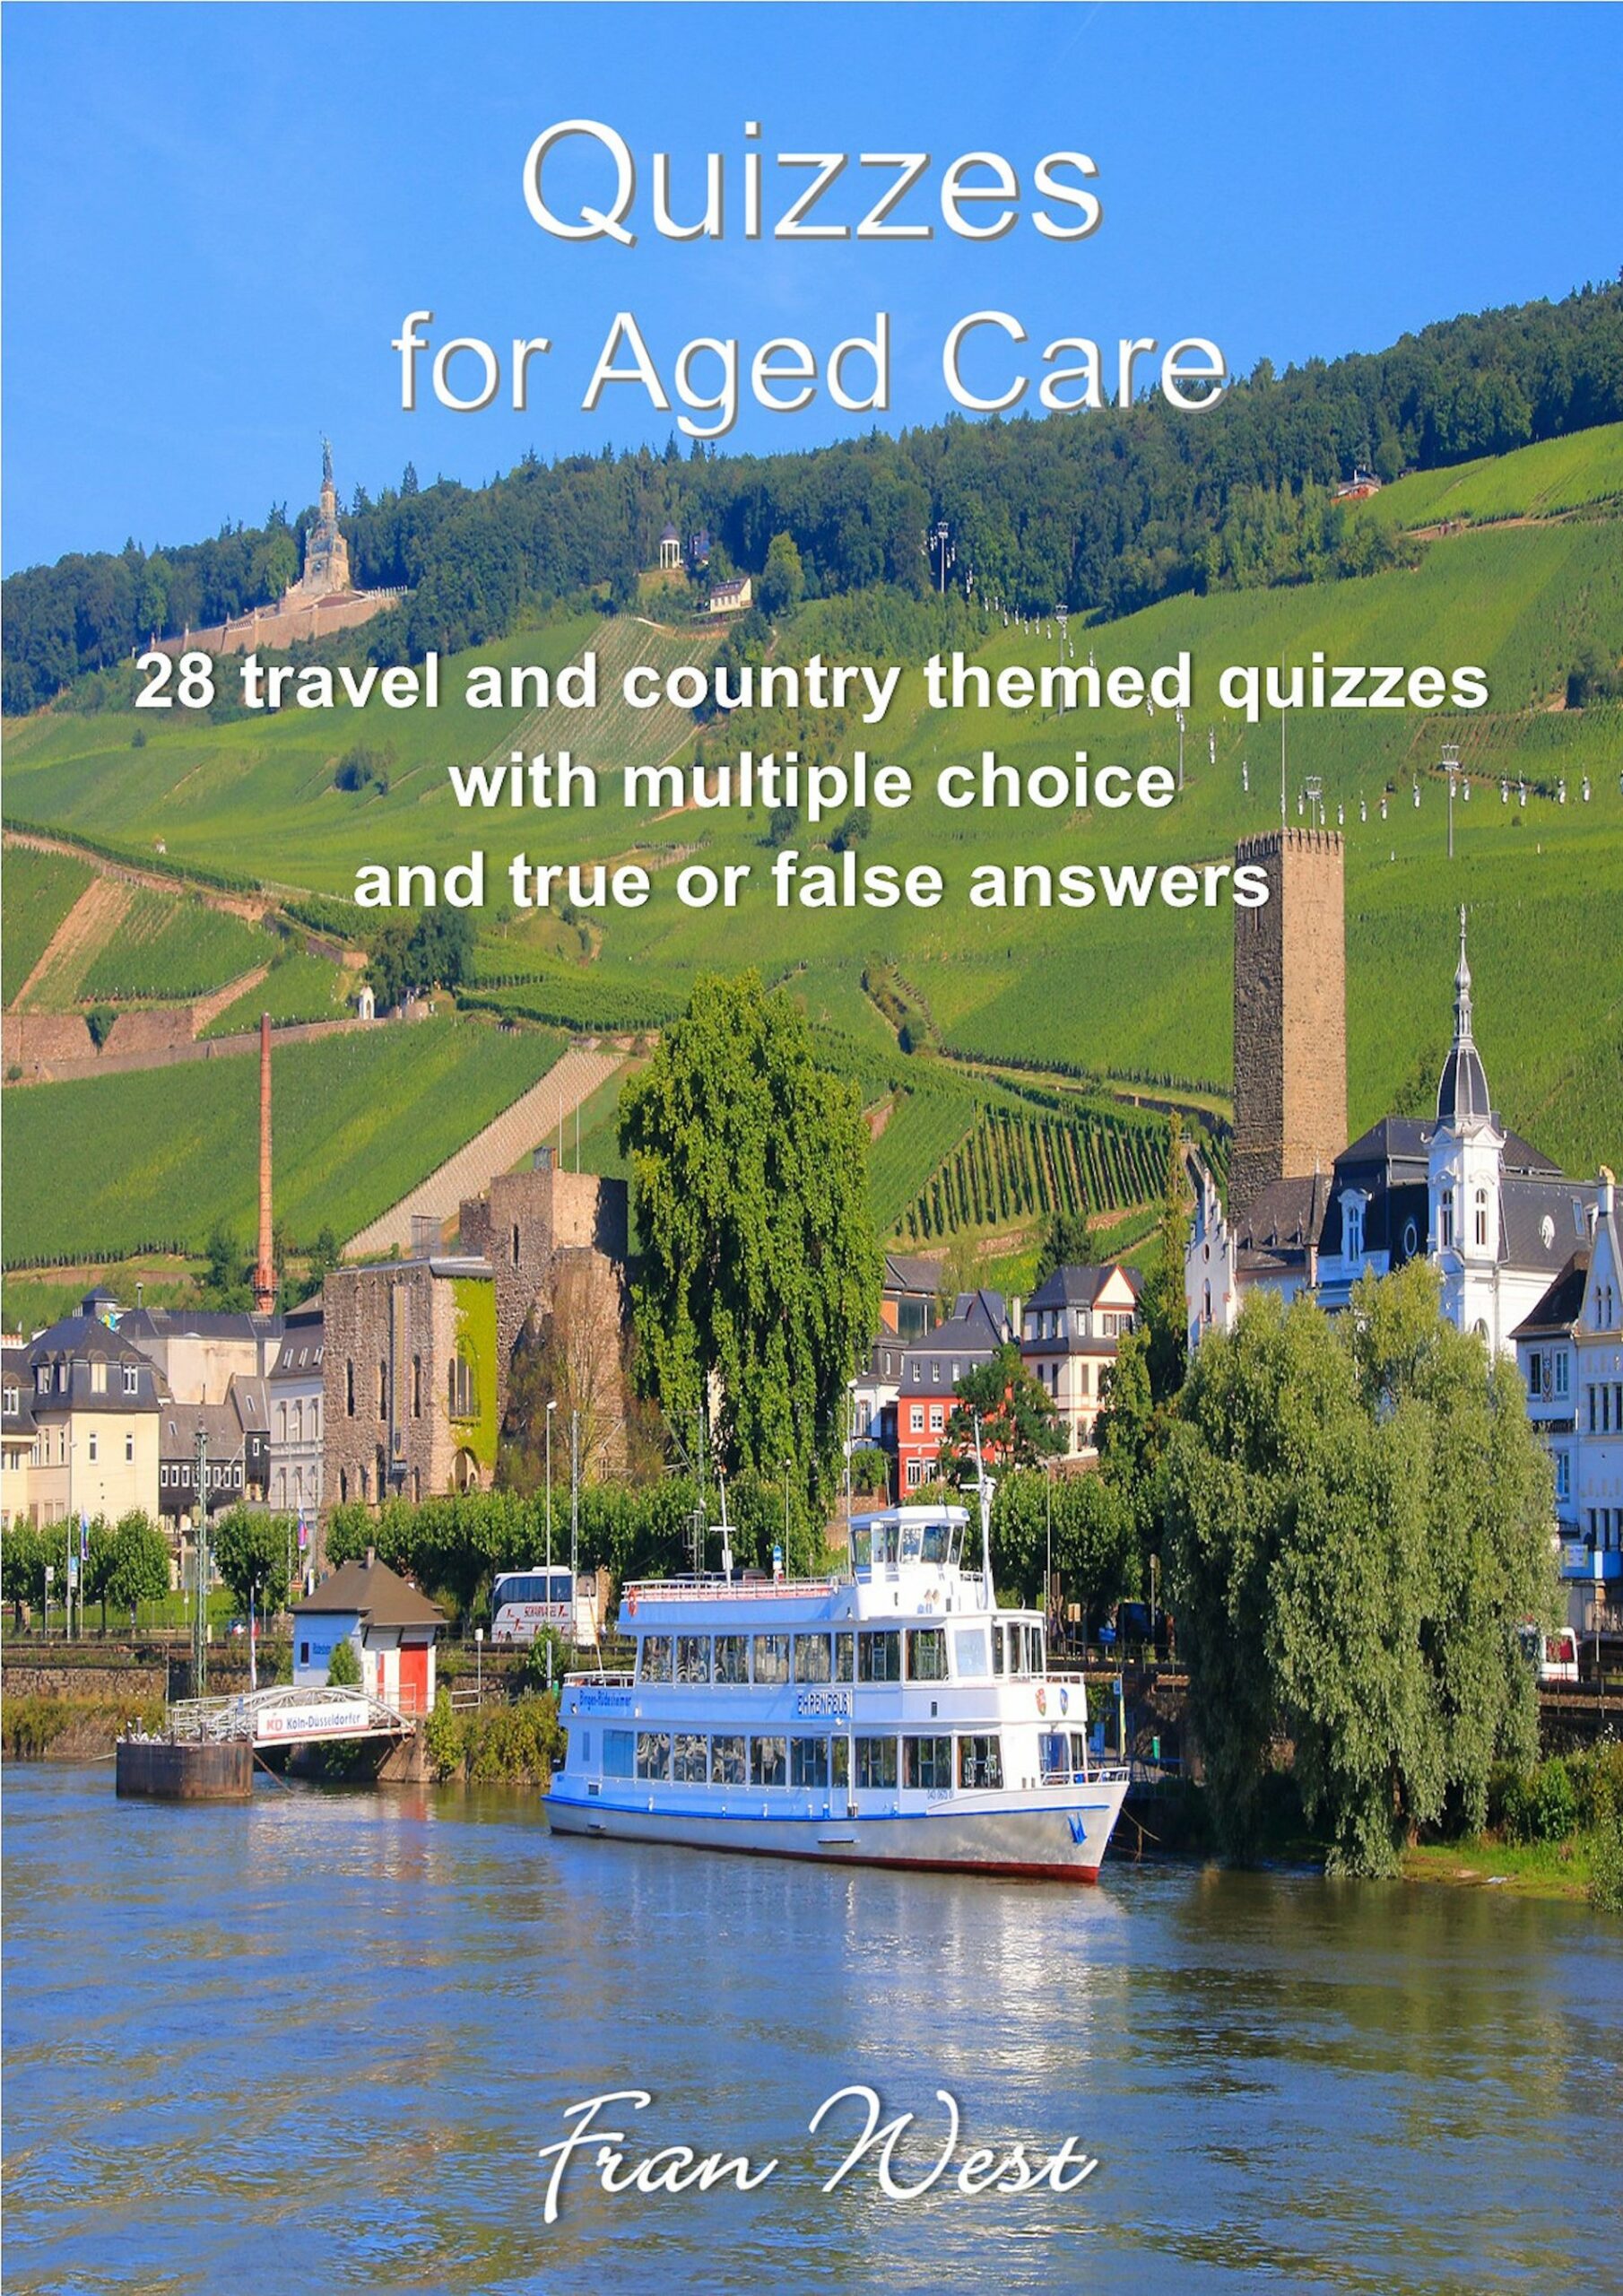 Quizzes for Aged Care: 28 travel themed quizzes